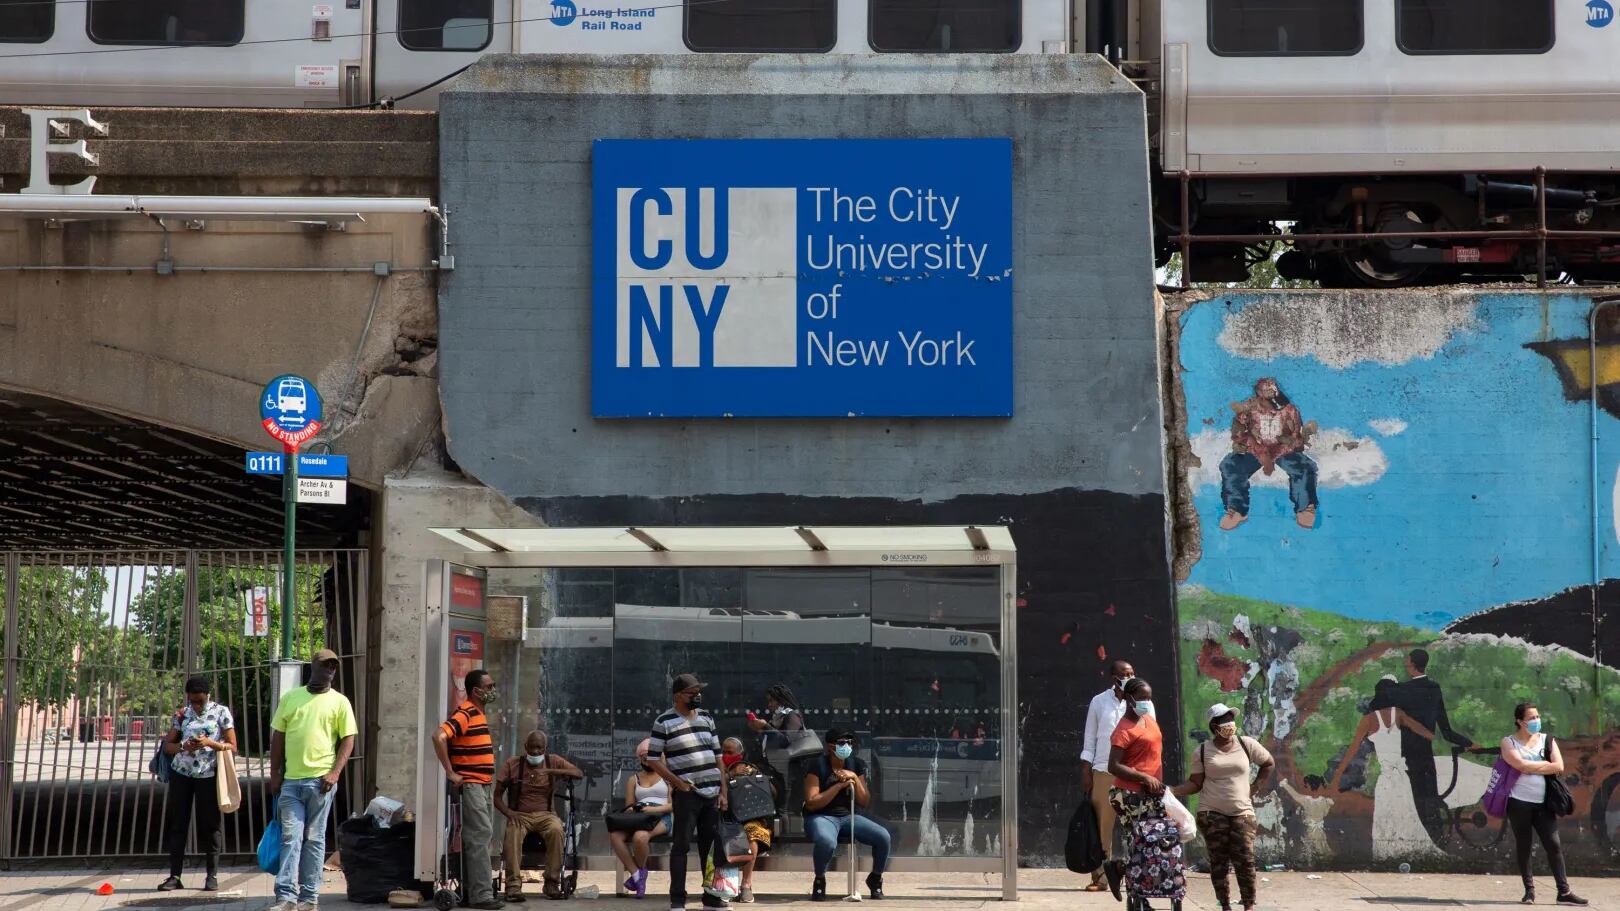 A sign for a CUNY campus with NYC silver subway trains running above ground over it.